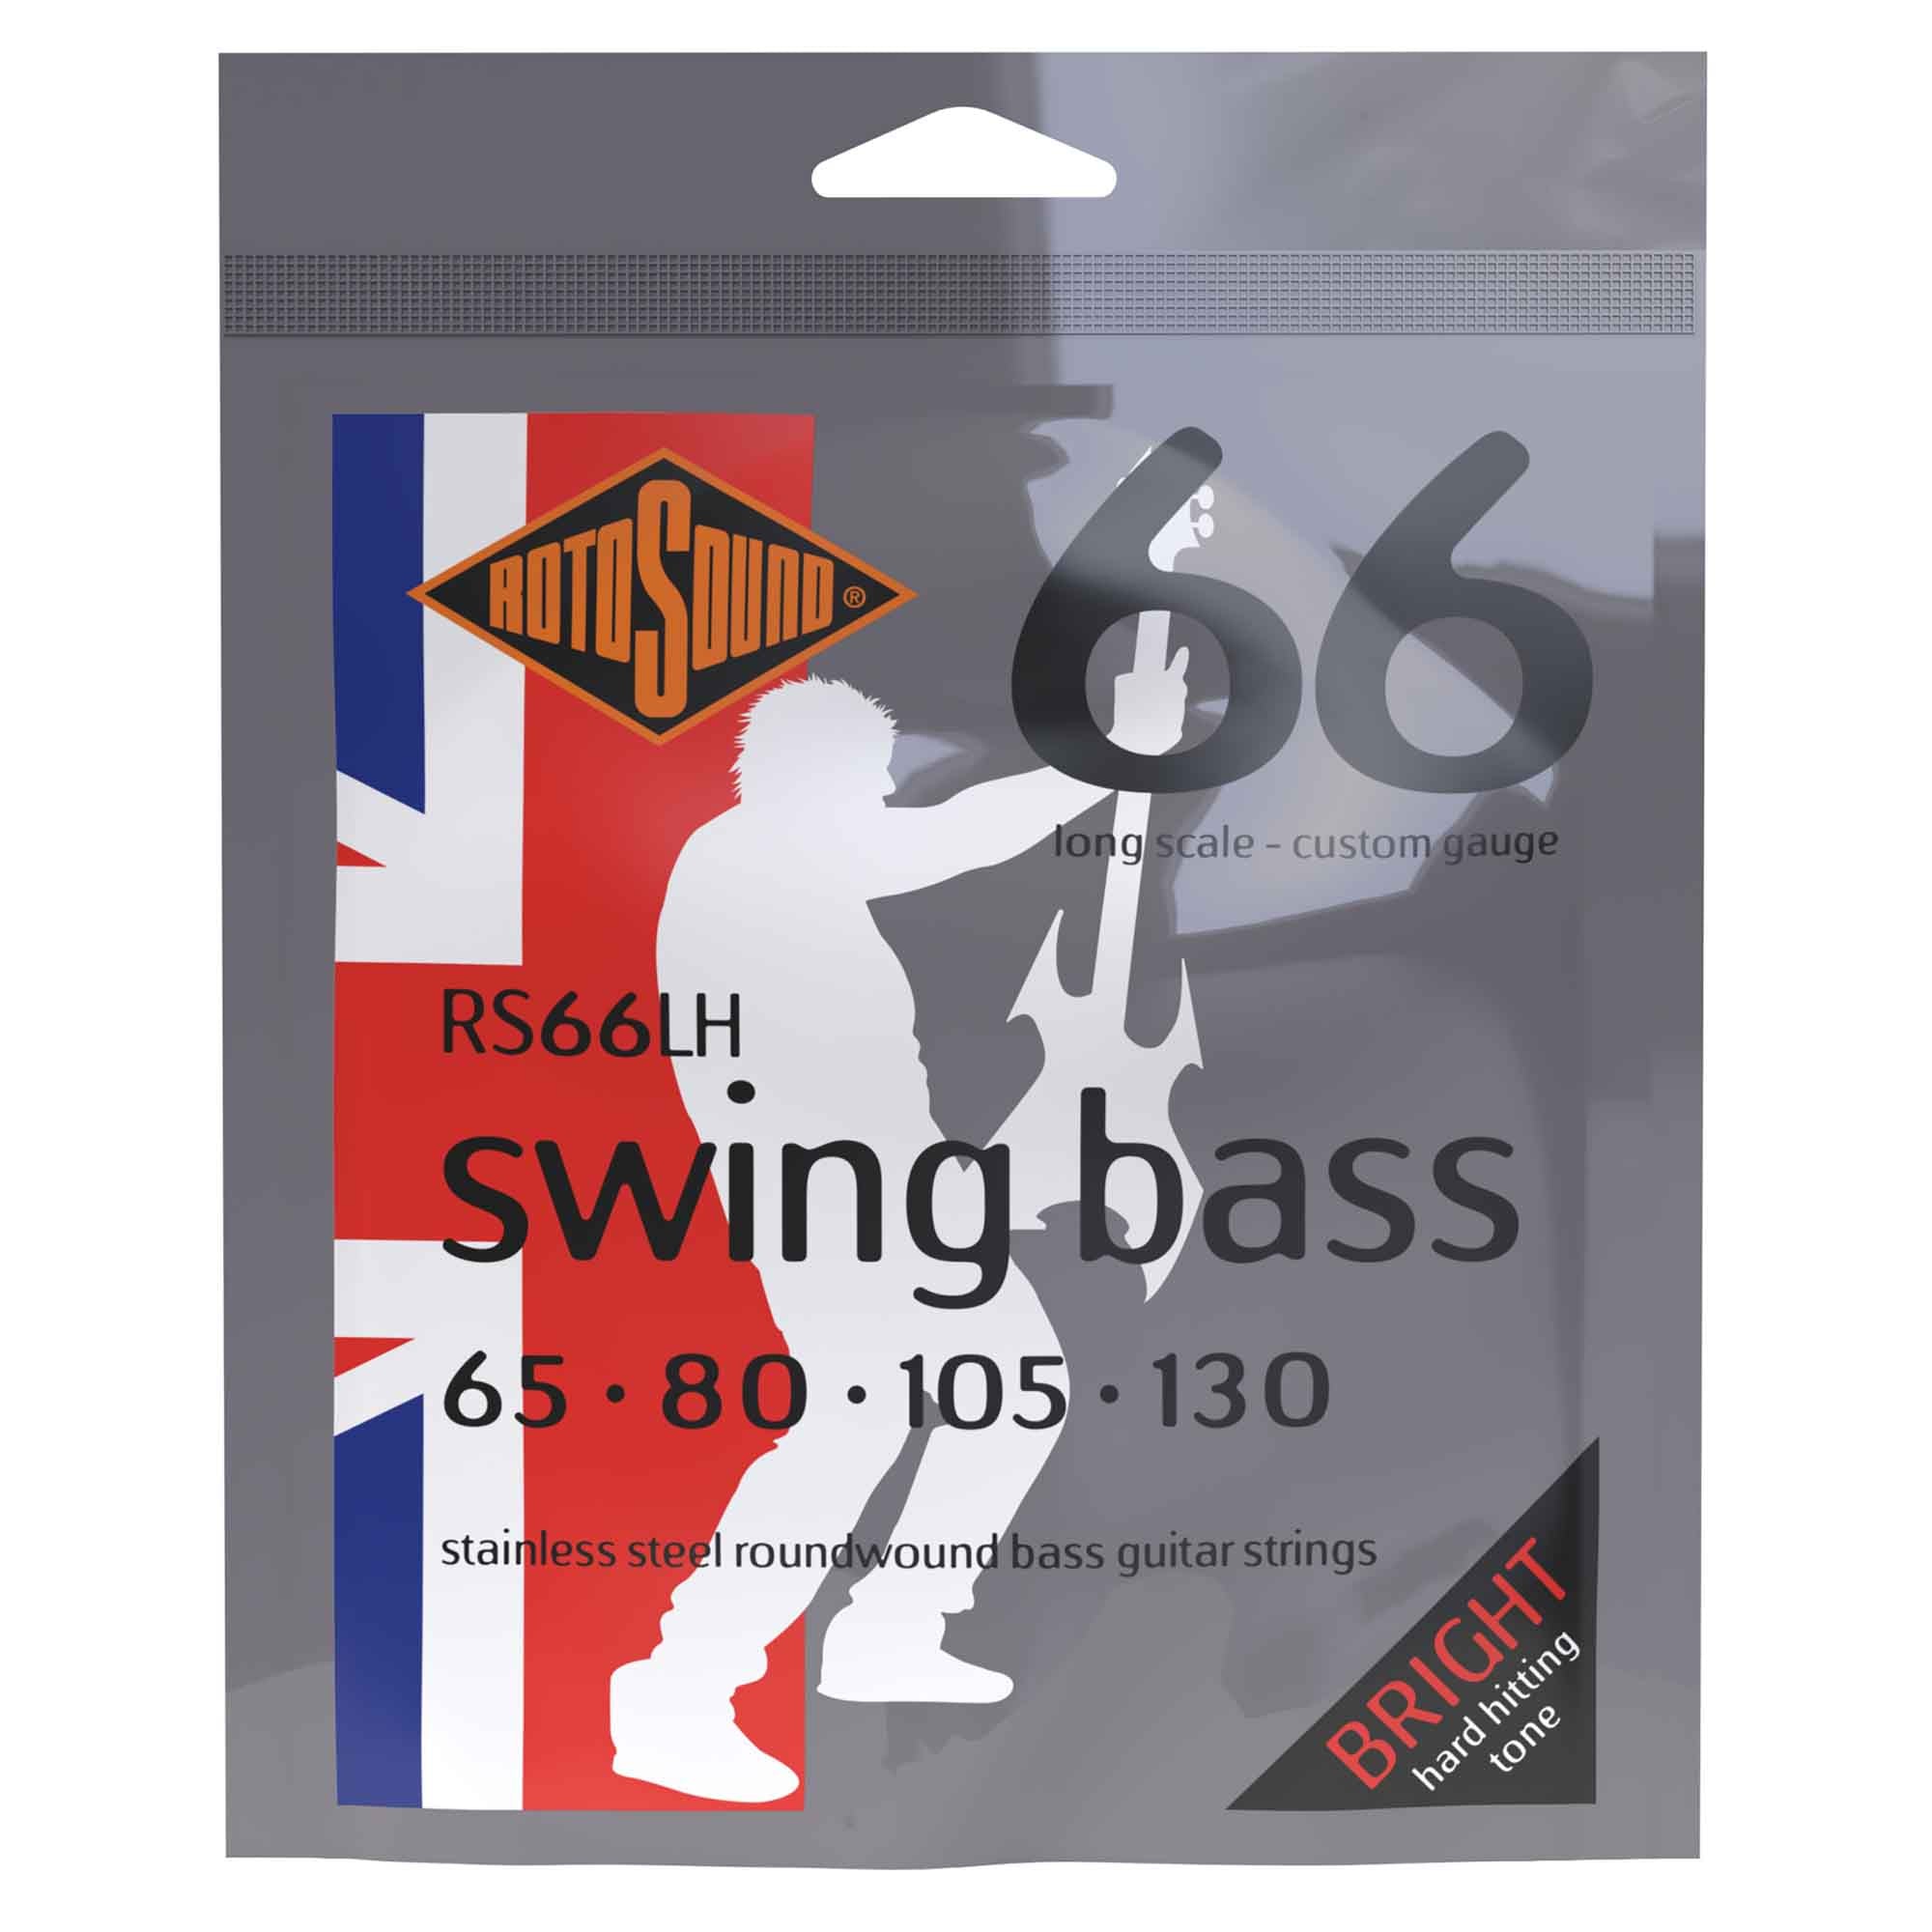 Rotosound RS66LH Drop Zone Stainless Steel Roundwound Bass Guitar Strings 65-130 Long Scale